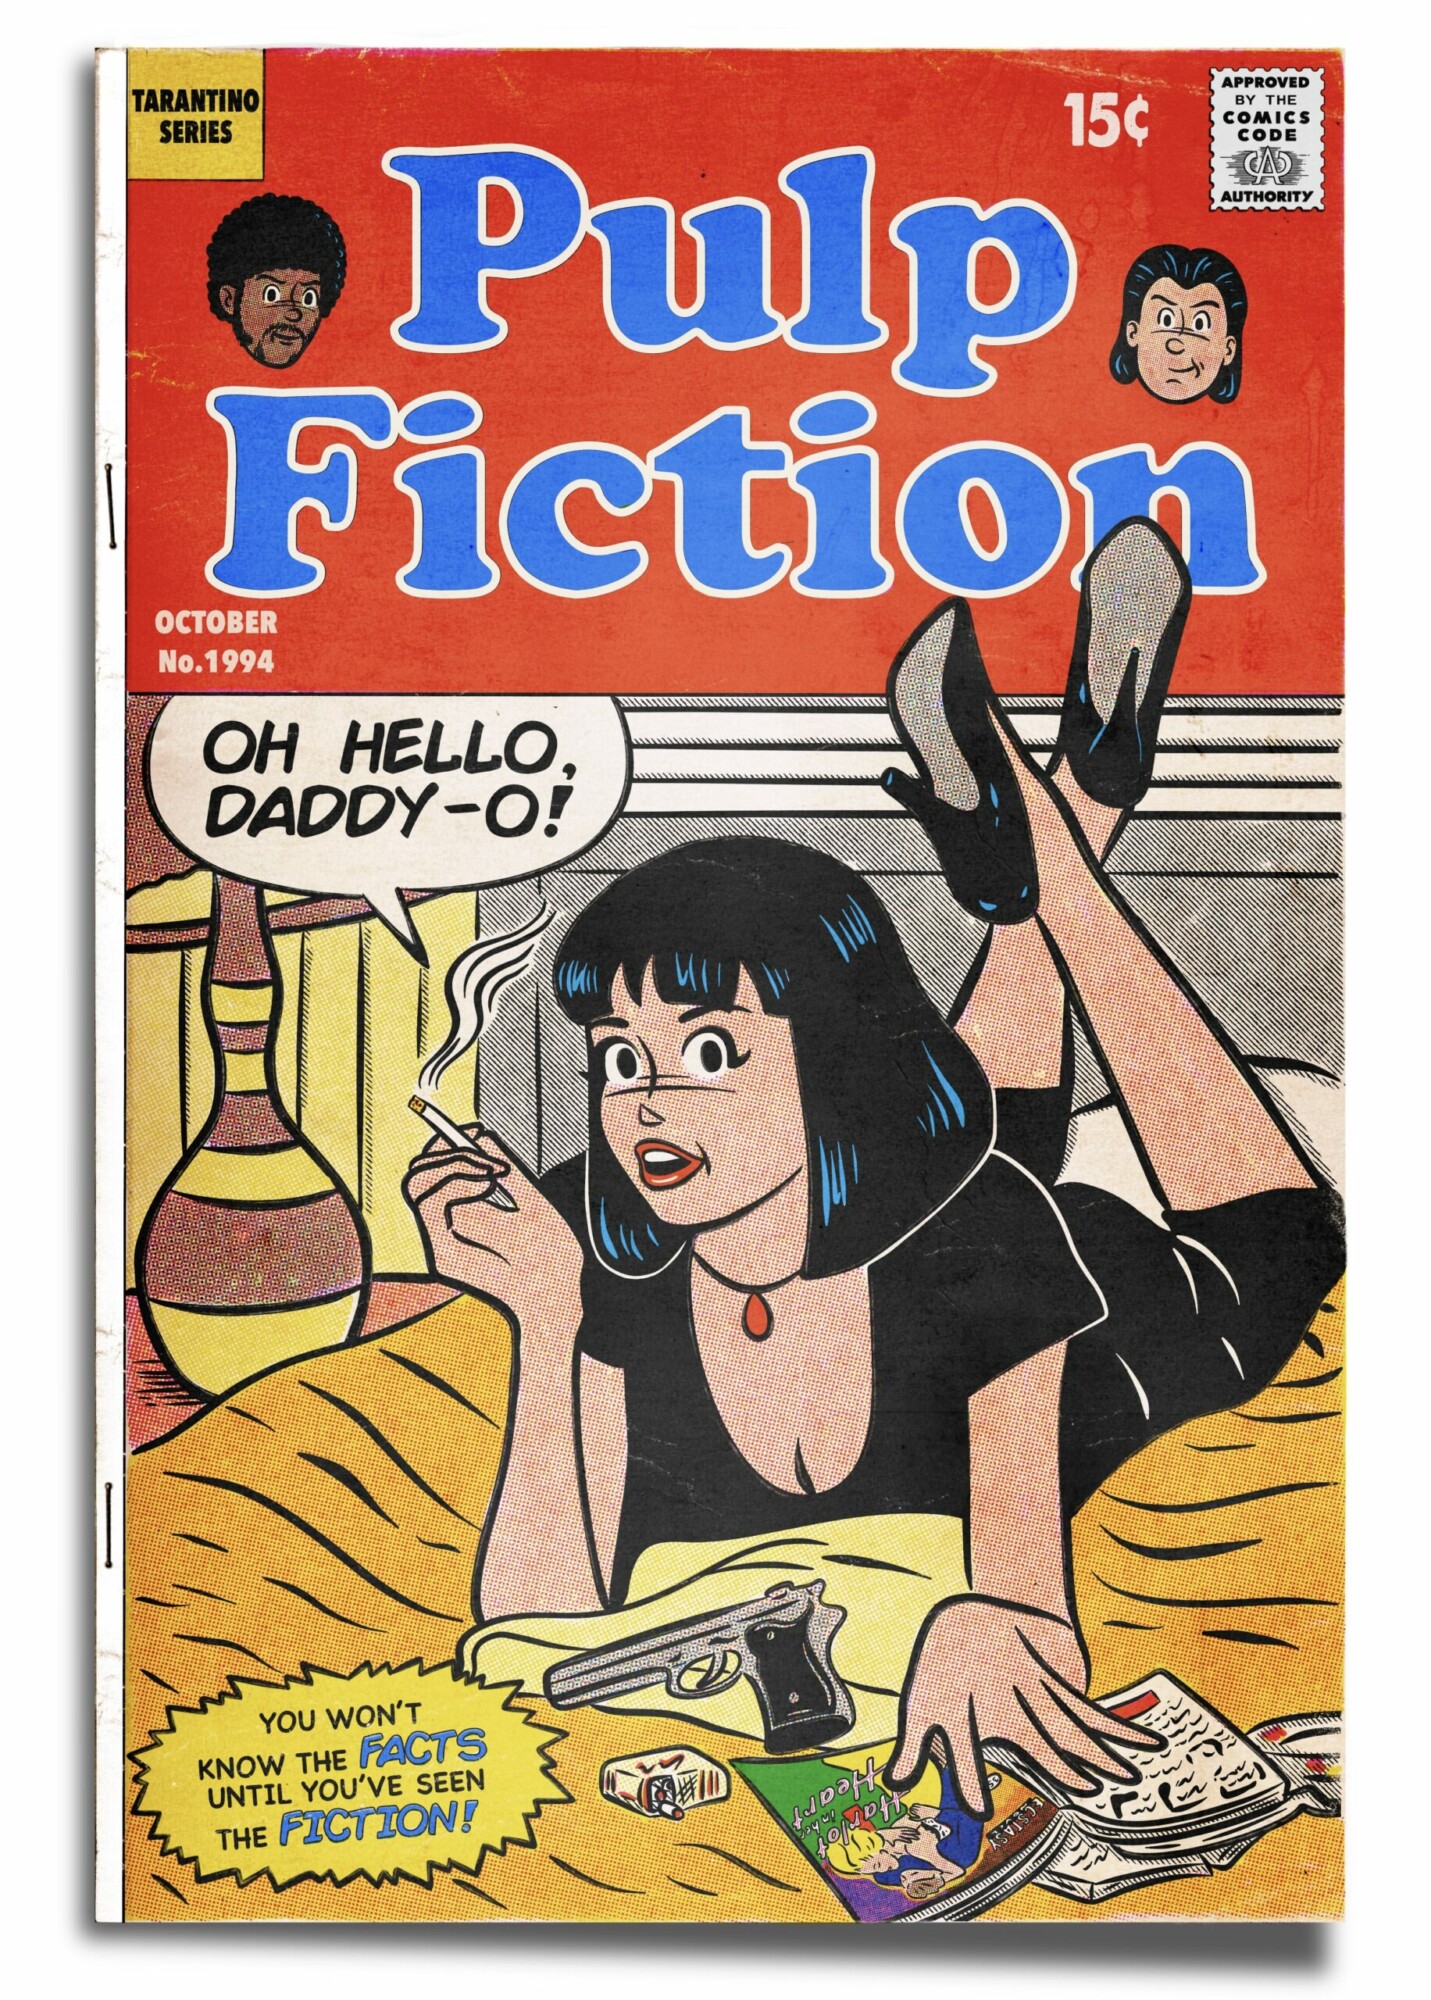 Archie comic-inspired Pulp Fiction poster